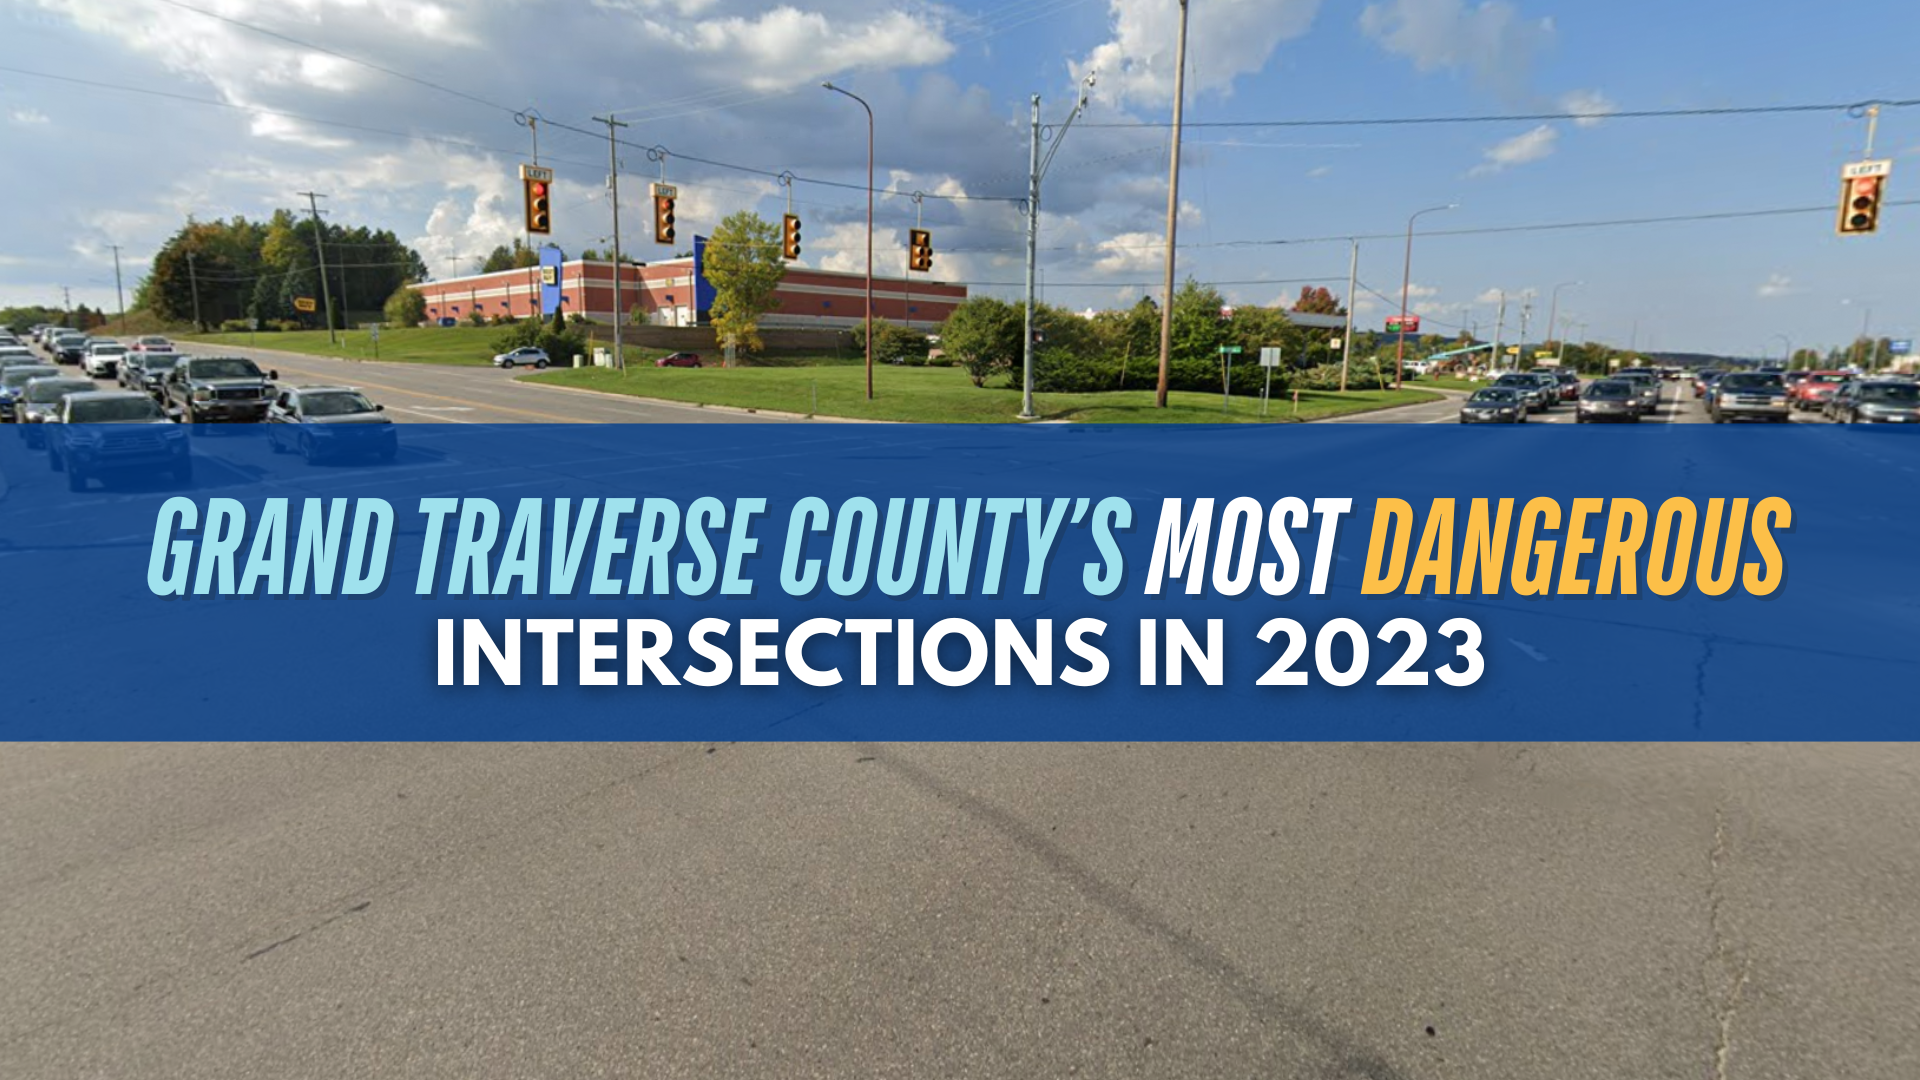 Grand Traverse County’s Most Dangerous Intersections in 2023